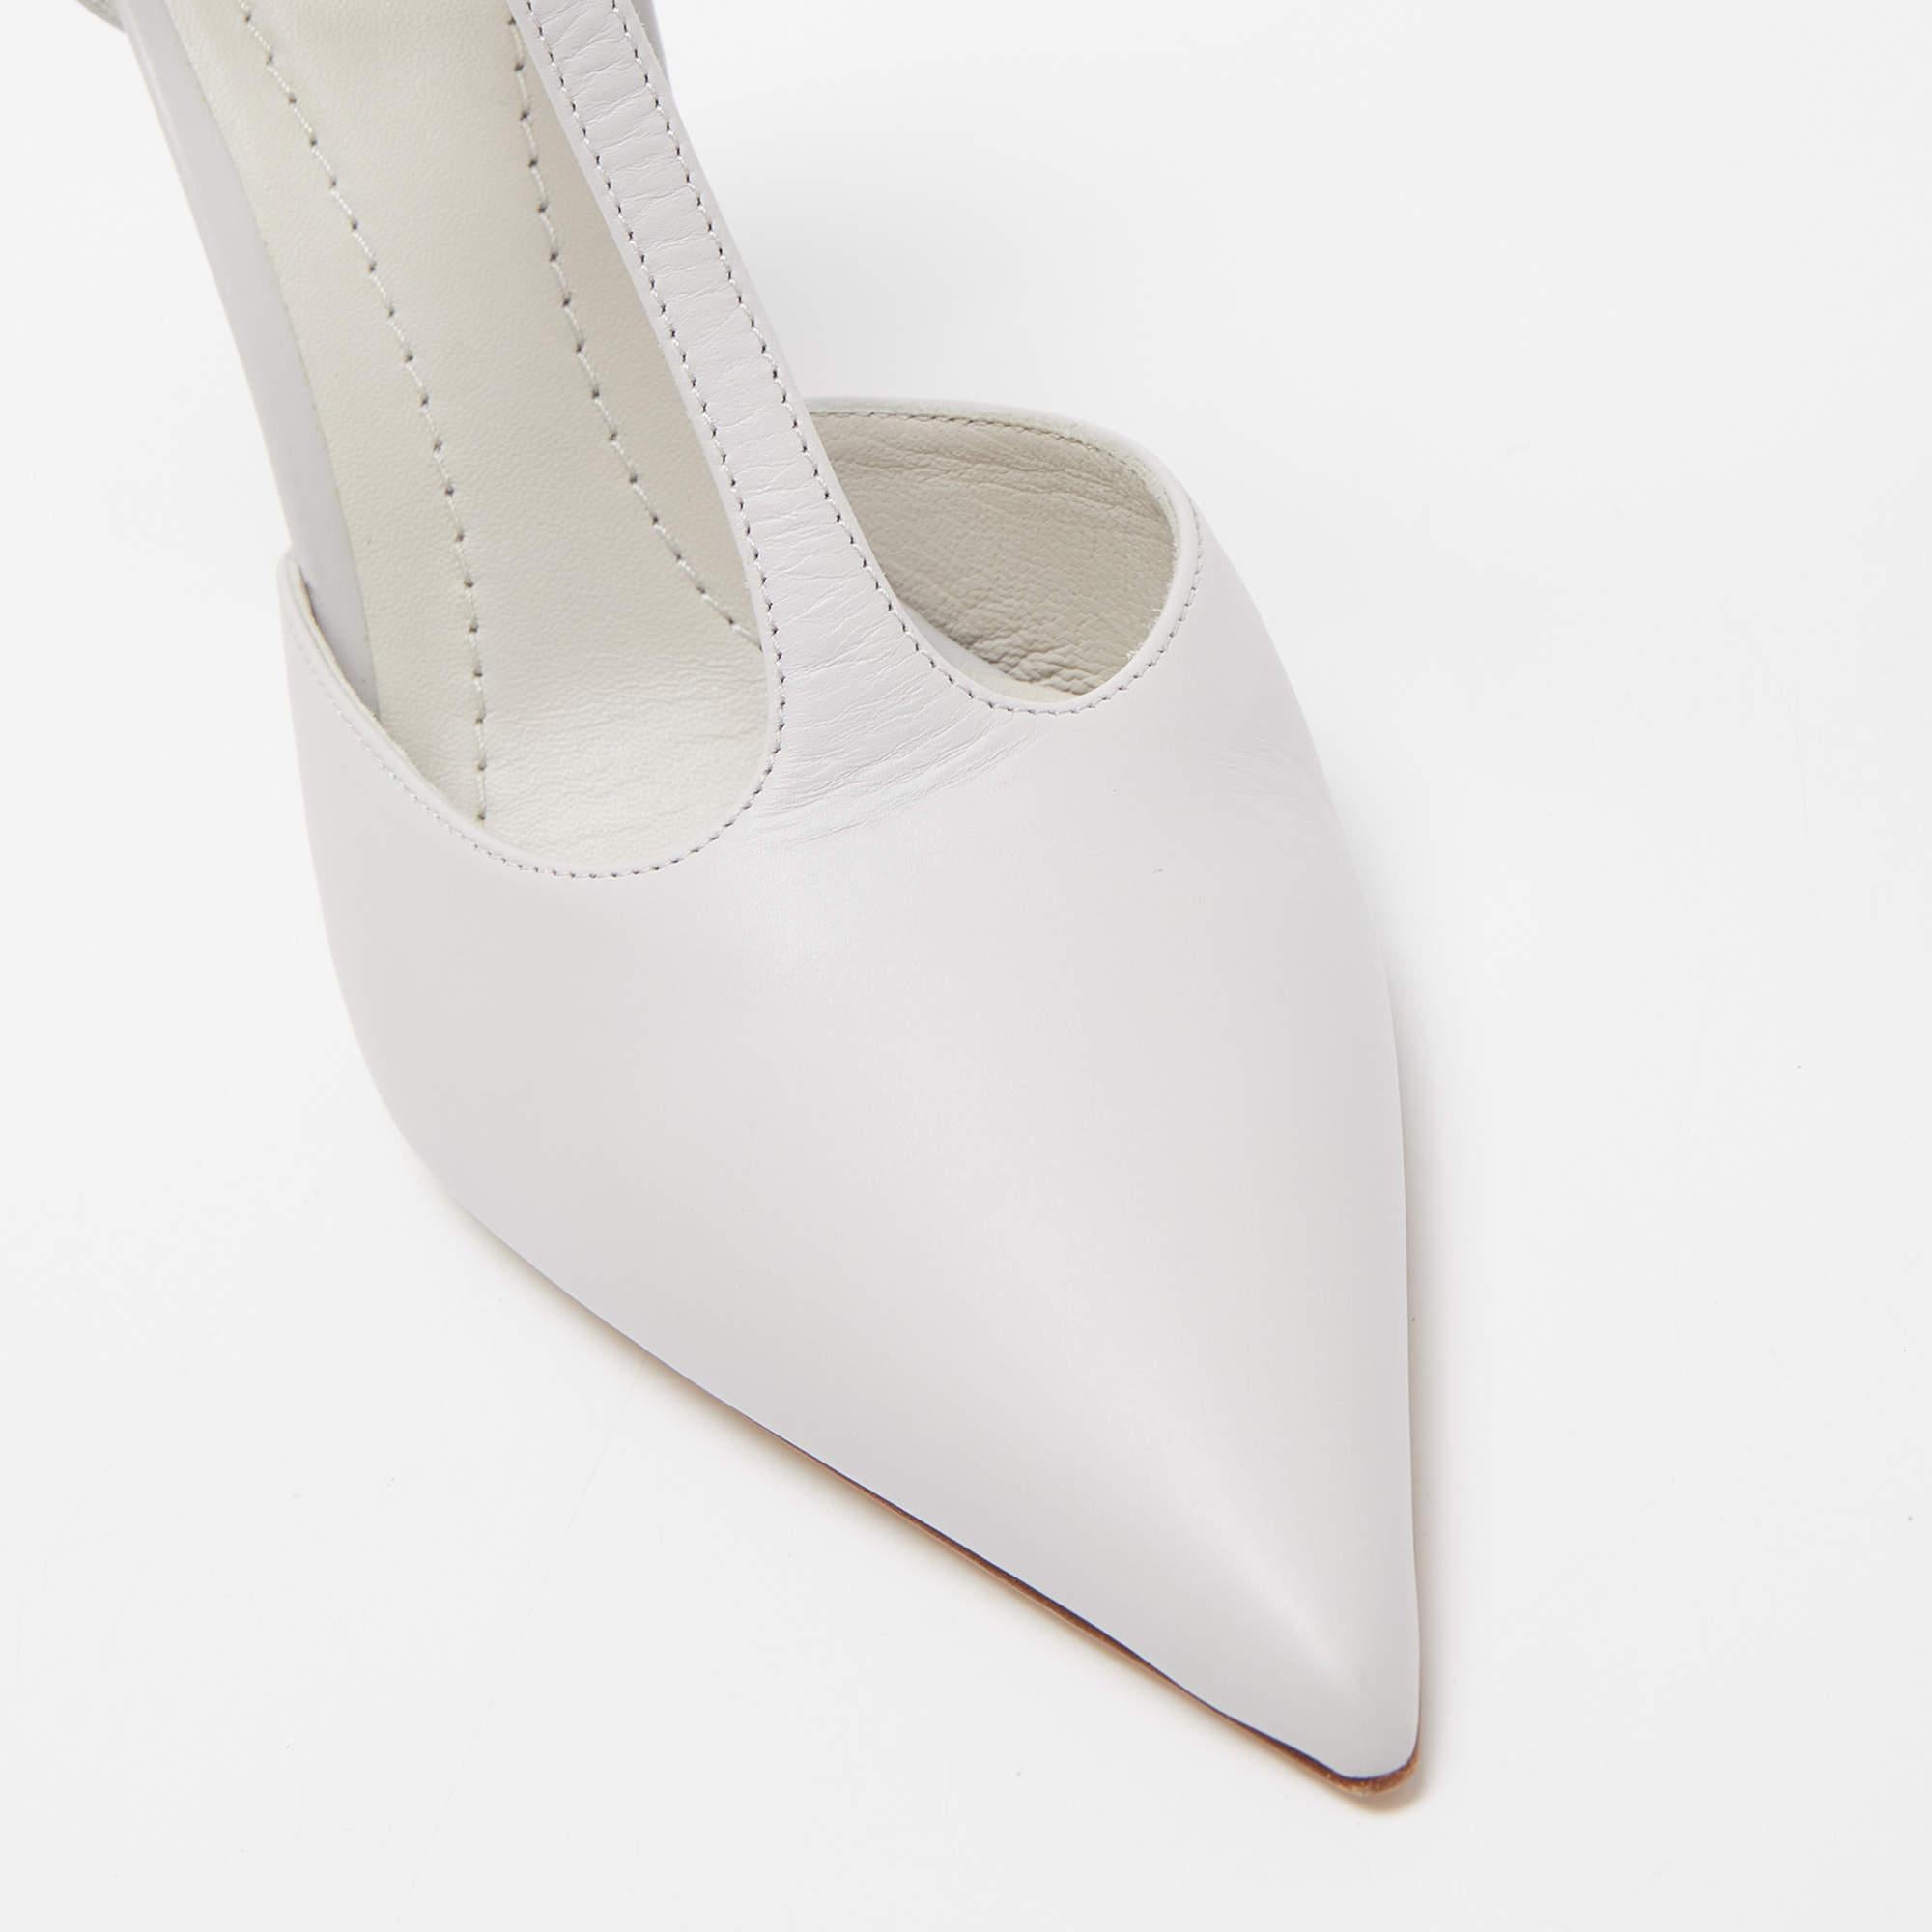 Defined by luxe cuts, unique details, durable construction, and a soft grey hue, this pair by Burberry has all the qualities of a fashionable shoe. Called the Welton, the pump features a leather body, chain ankle trim, leather ankle ties, and carved